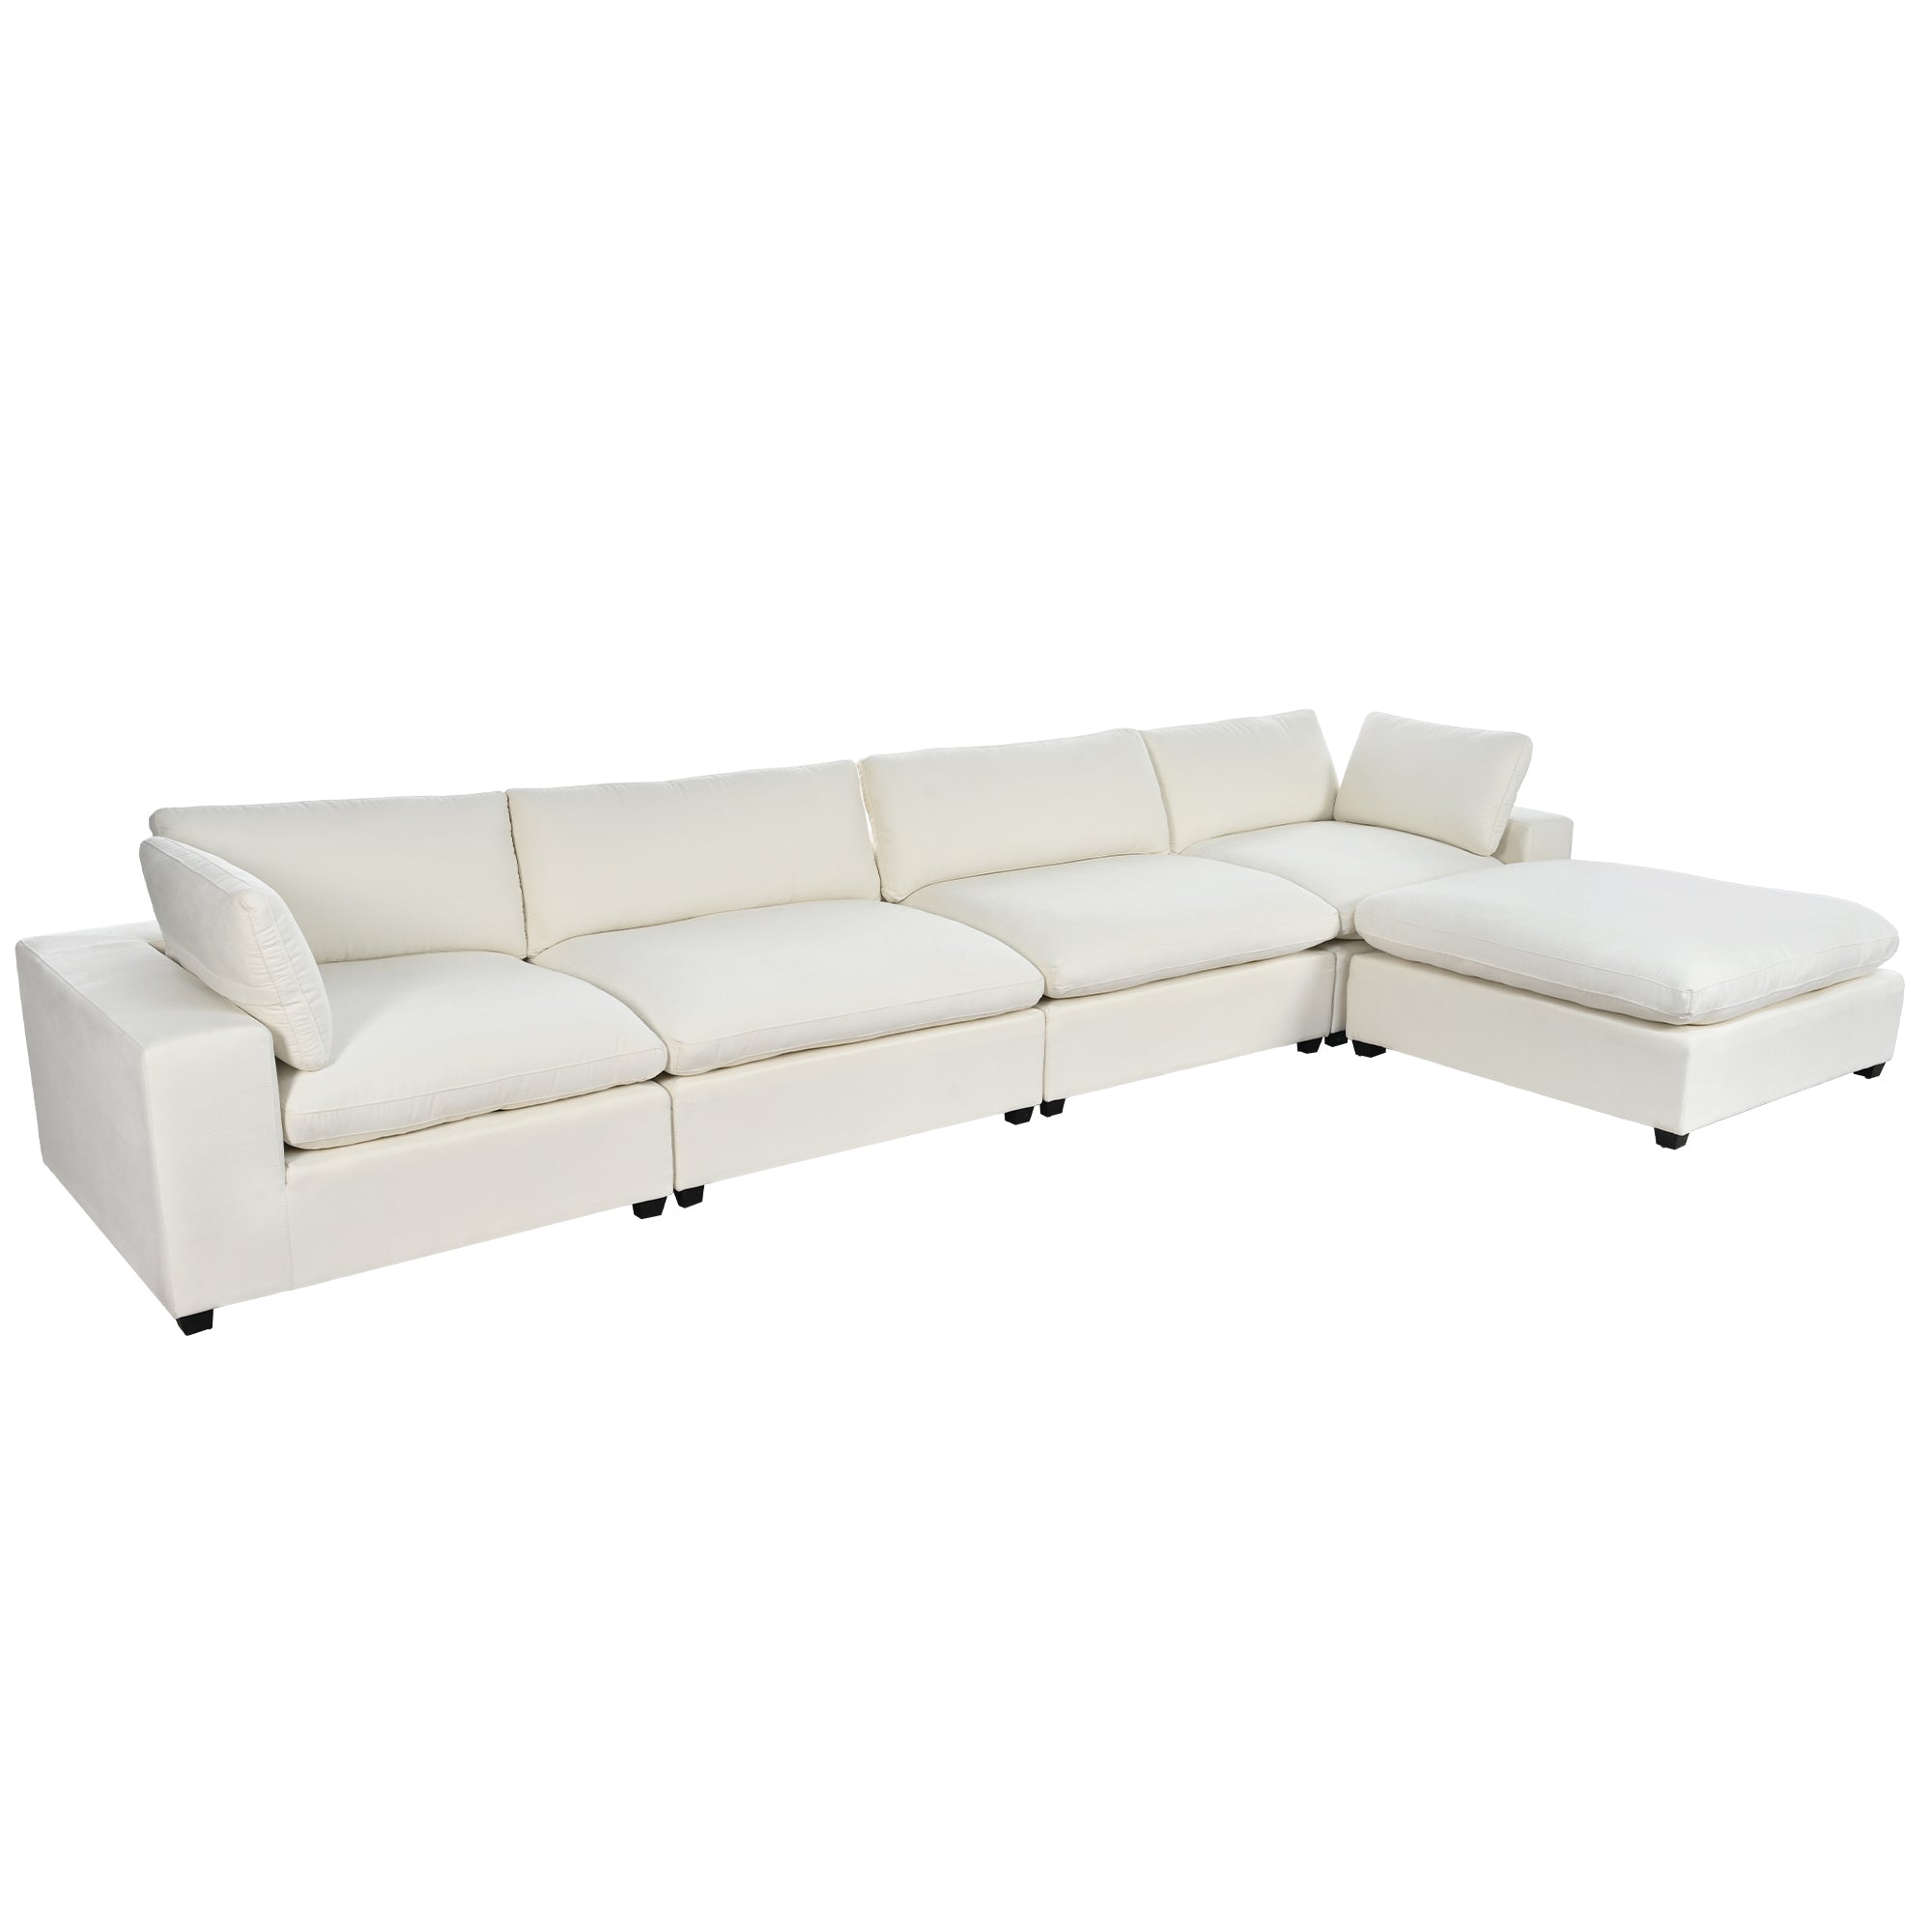 U style Upholstered Oversize Modular Sofa with beige-polyester-5 seat